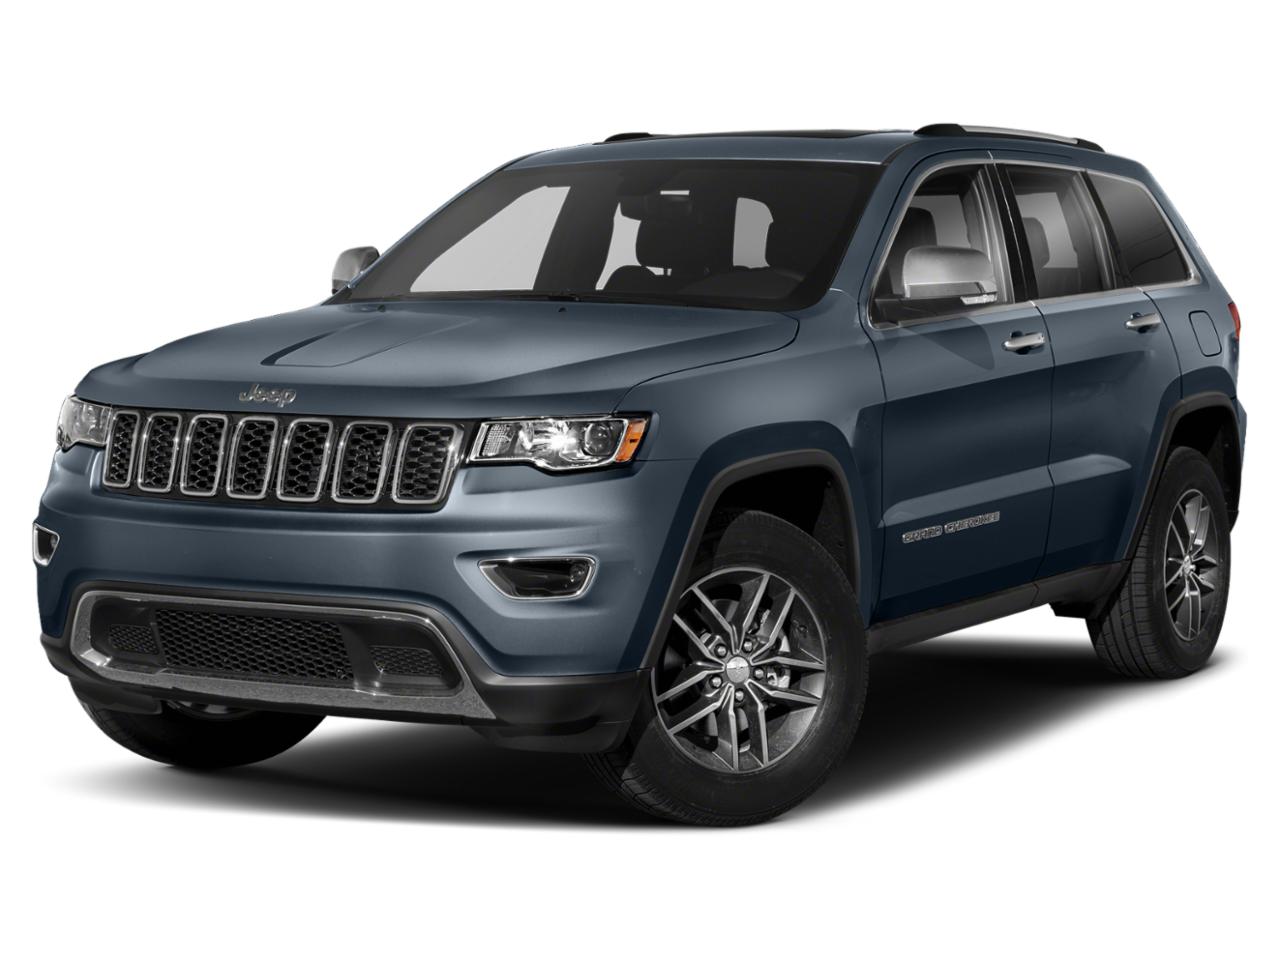 Used Slate Blue Pearlcoat Jeep Grand Cherokee Limited 4x4 For Sale In Miami Fl Lc